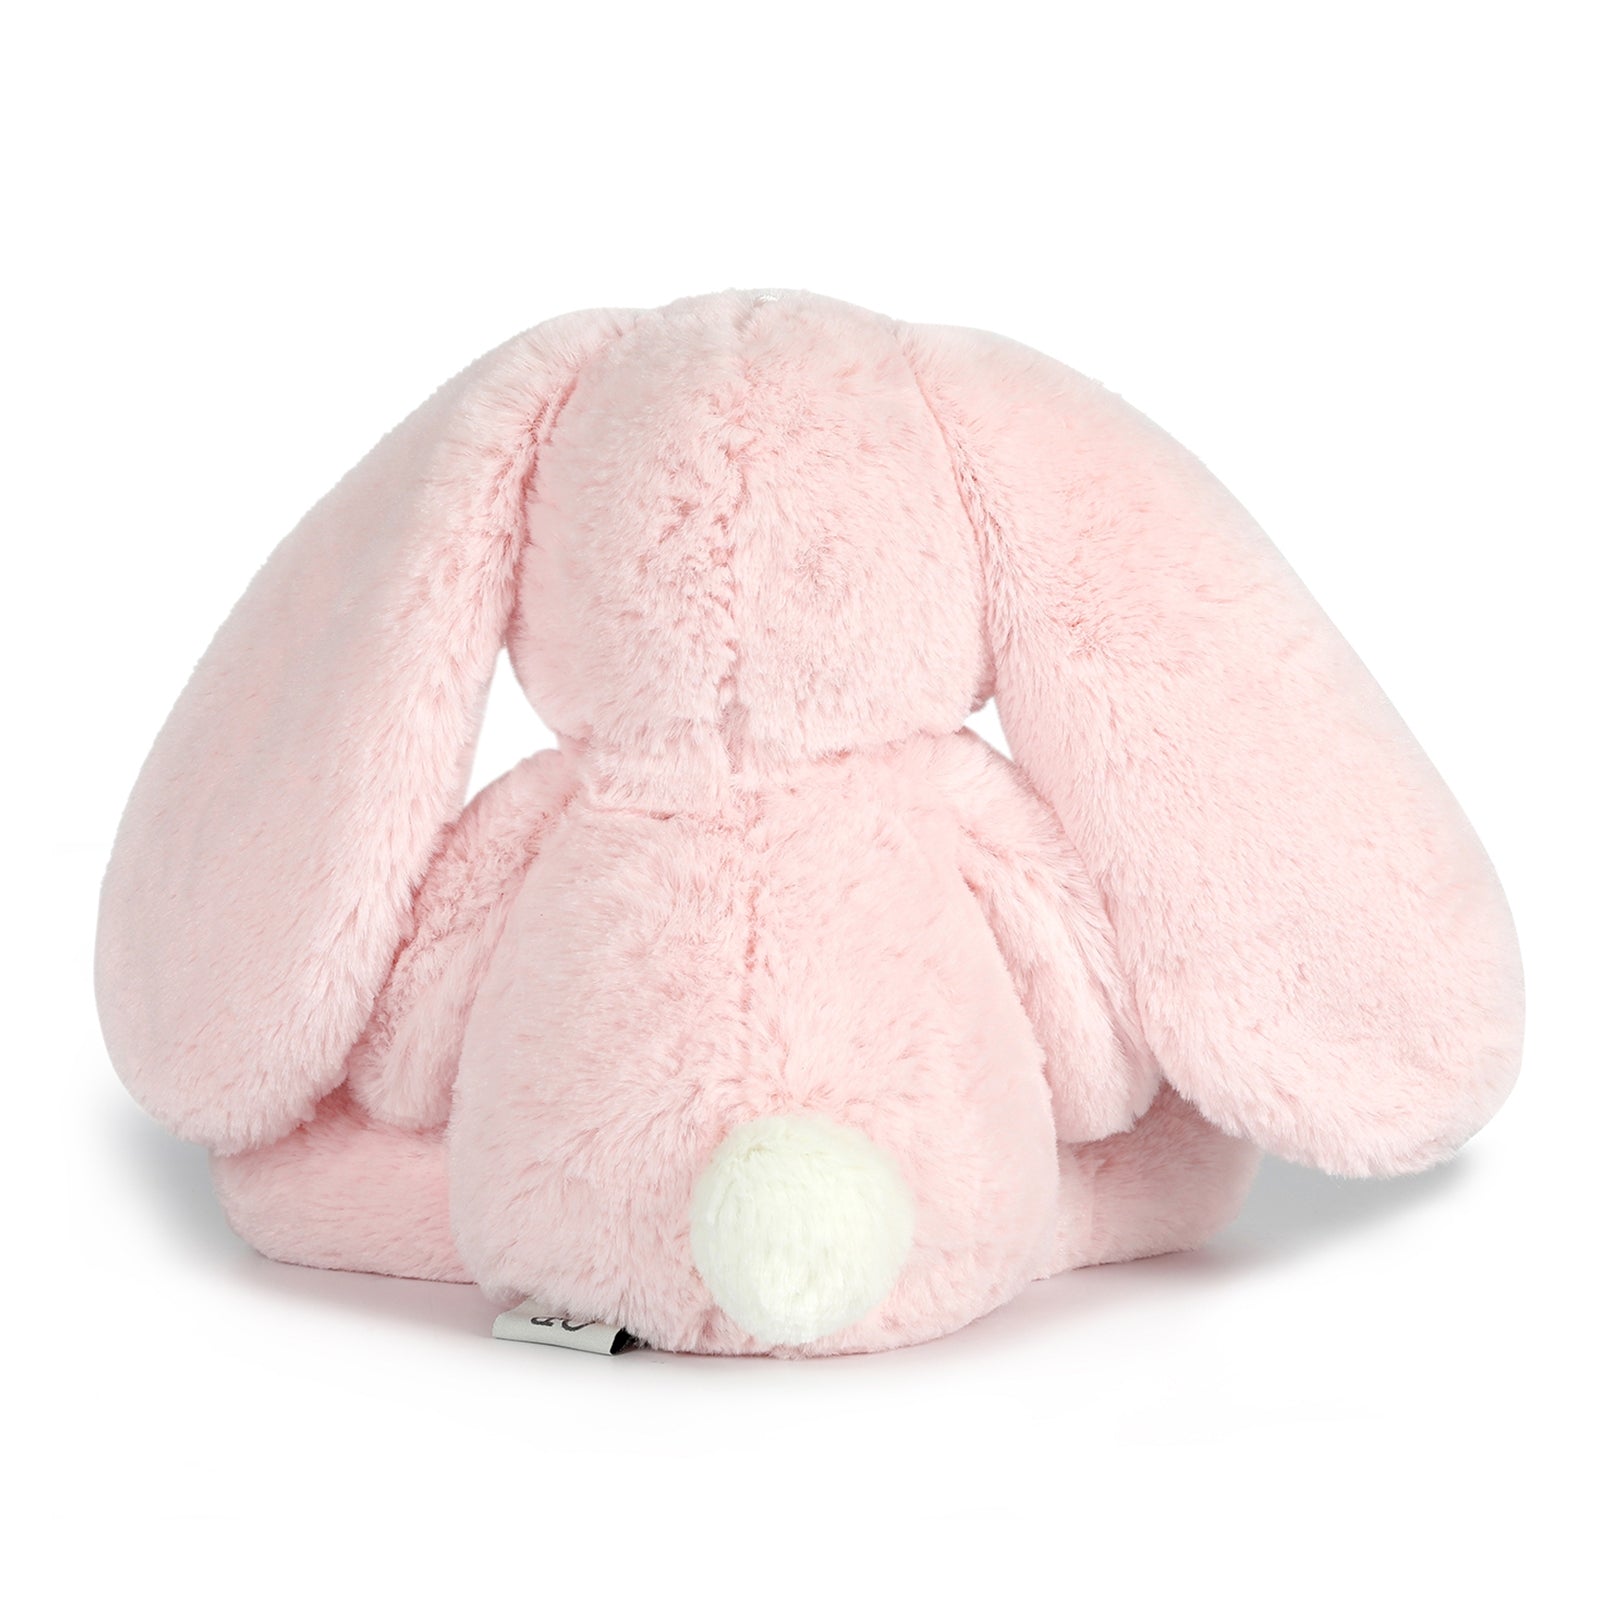 Betsy Pink Bunny stuffed animal, Designed by OB in Australia